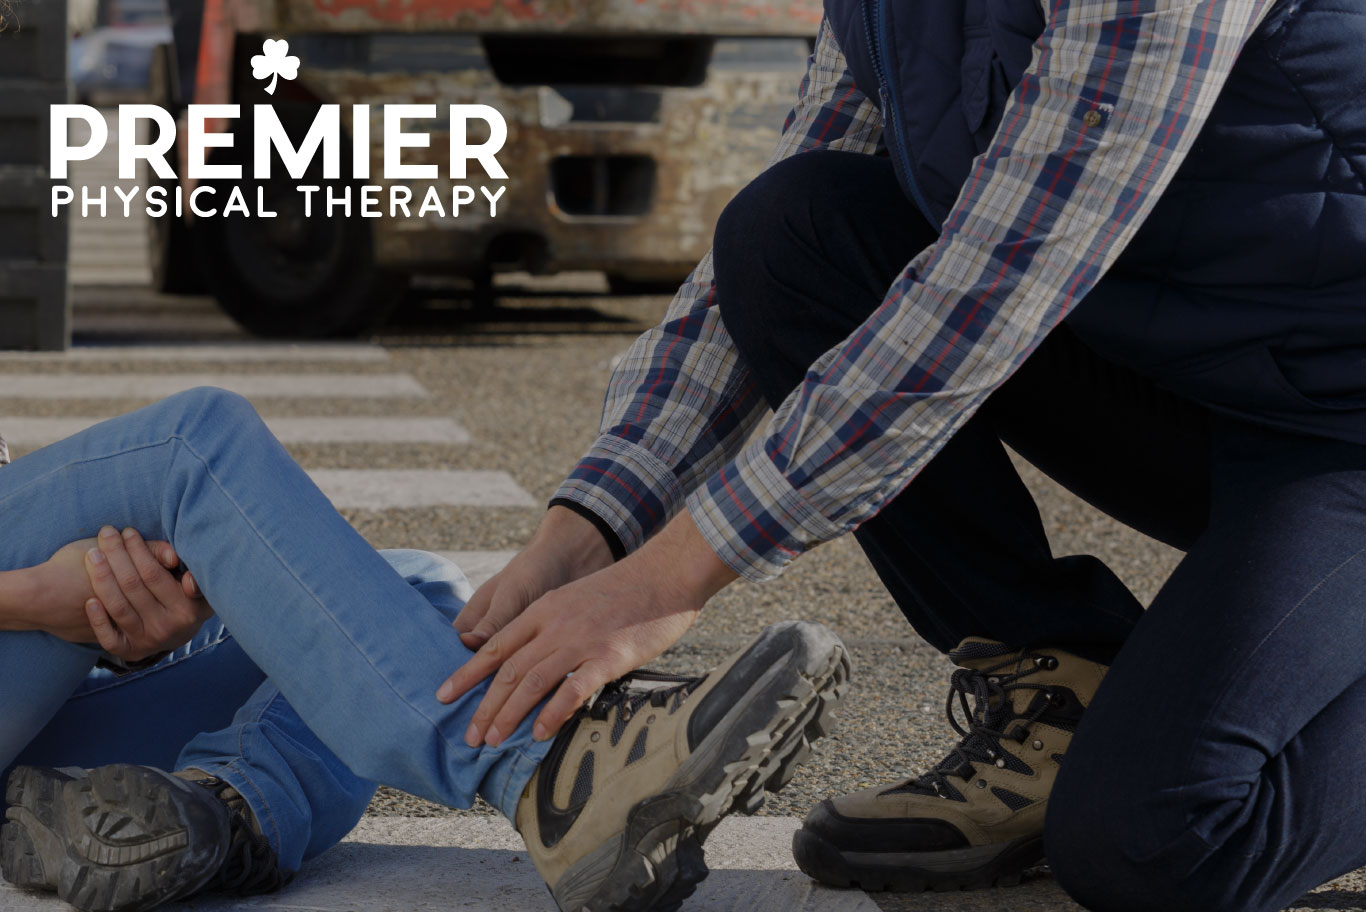 Workers’ Compensation with Premier Physical Therapy